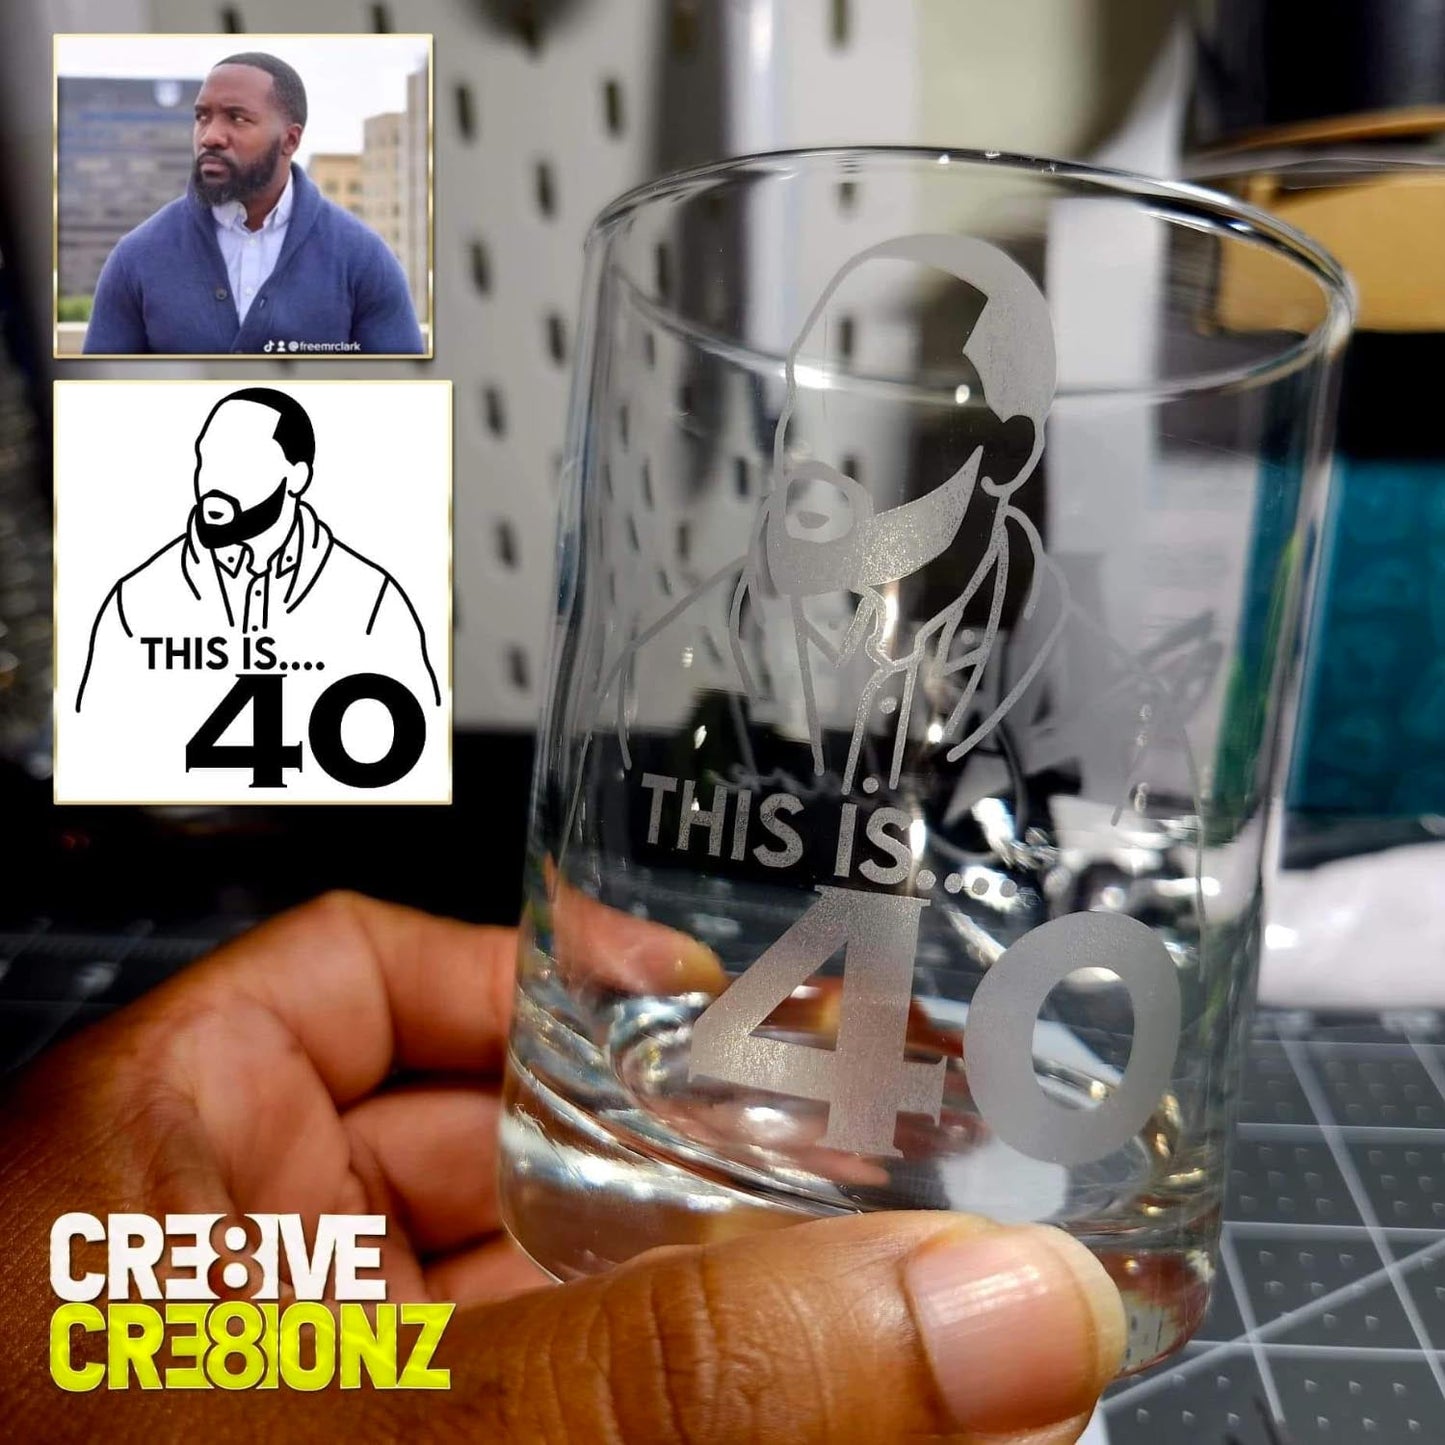 Custom Etch Whiskey Glass - Cre8ive Cre8ionz